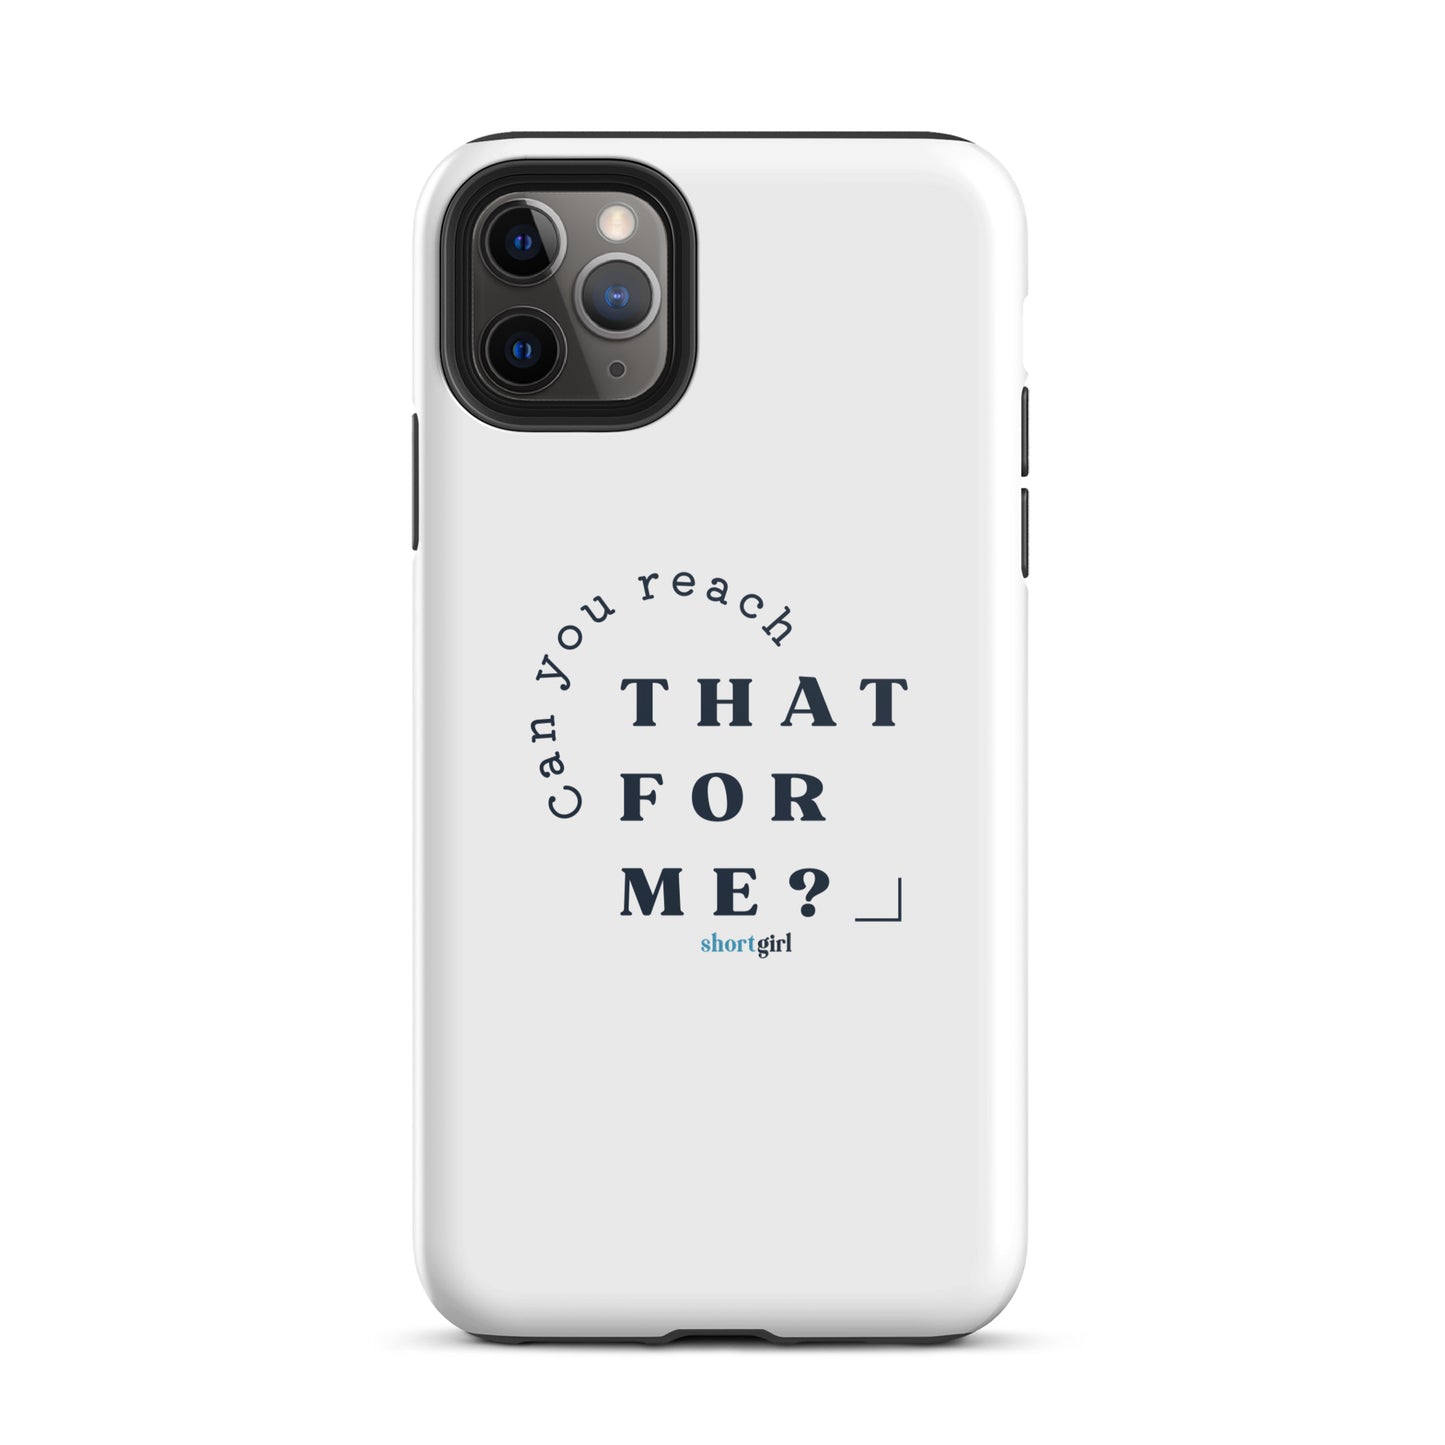 Tough iPhone case - Can you reach that for me?